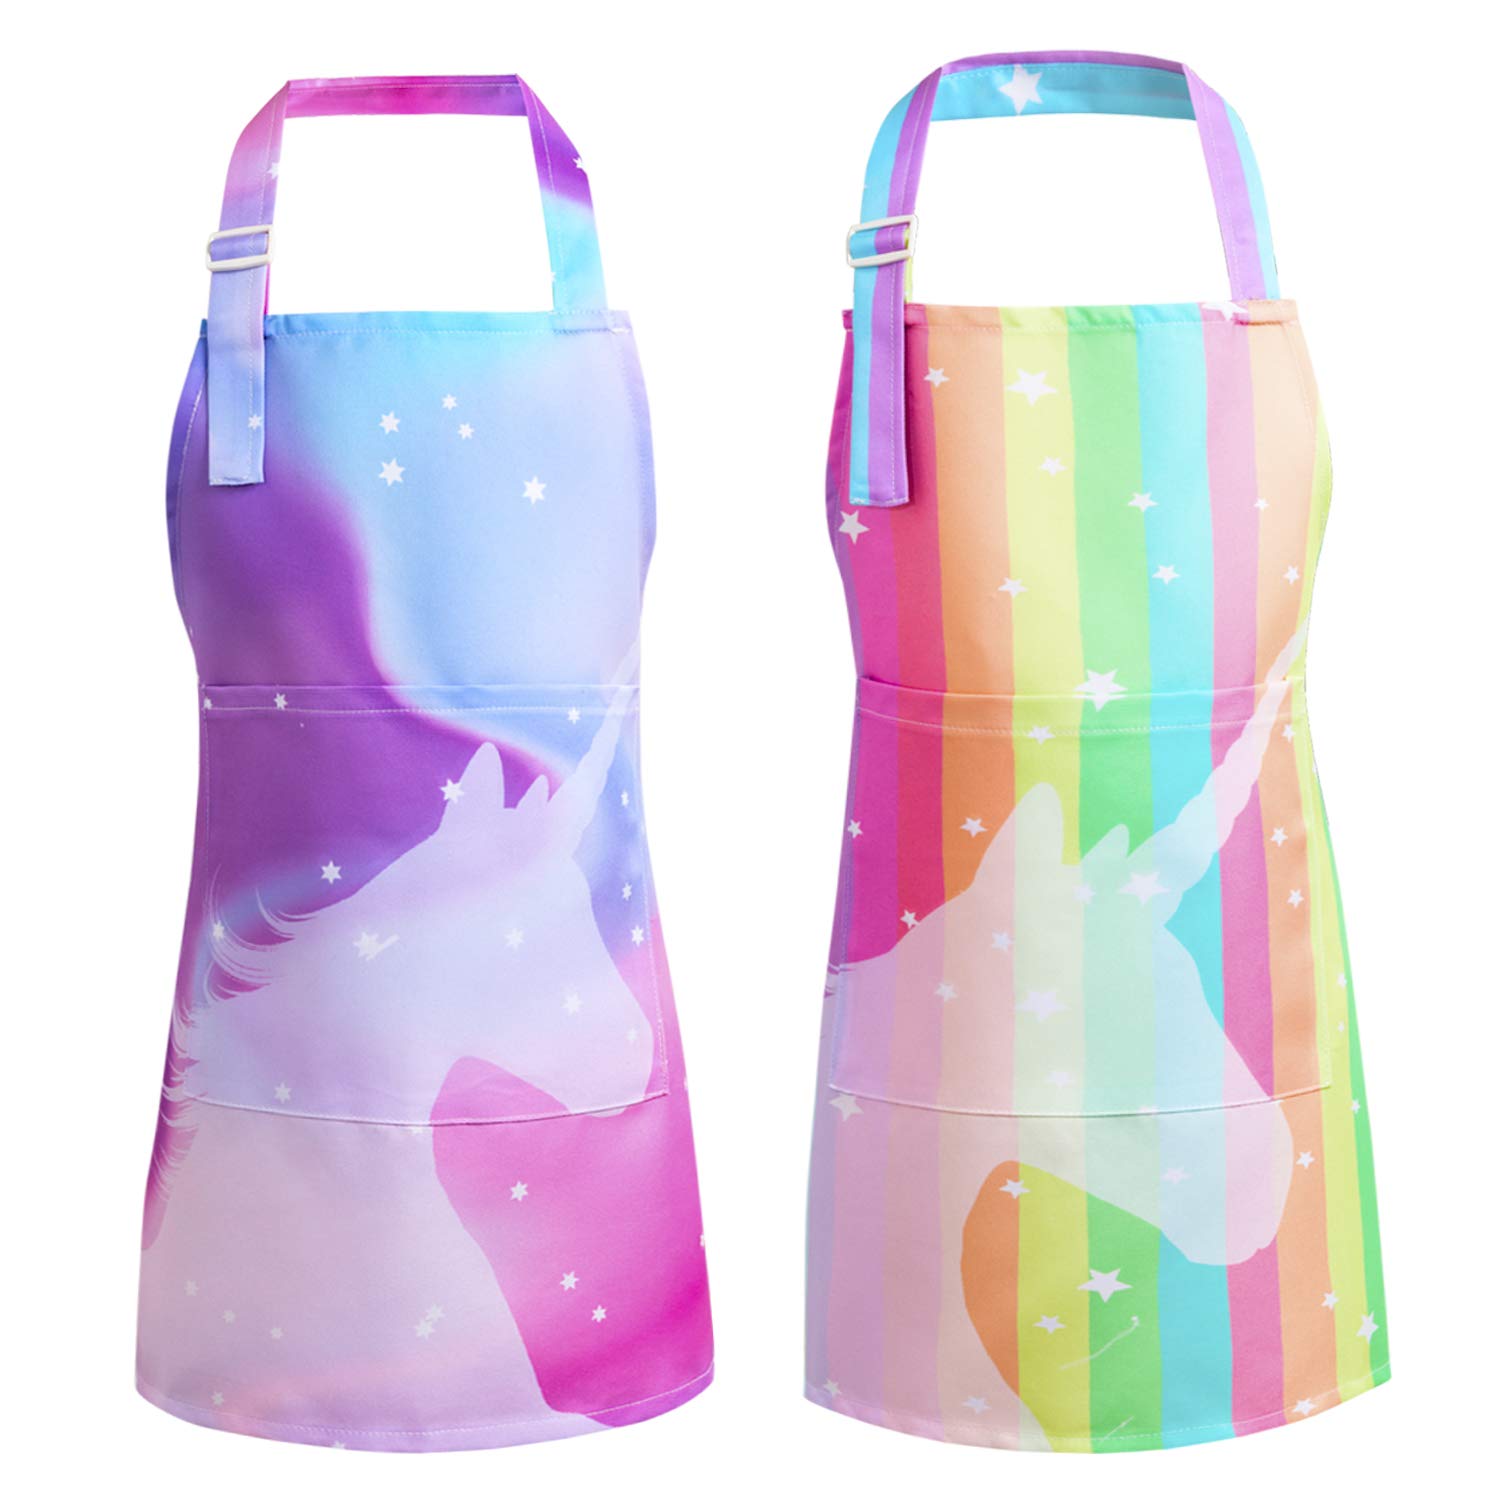 Pashop 2 Pack Kids Apron Rainbow Unicorn Aprons With Pockets For Girls Boys Toddler Apron For Painting Cooking Baking